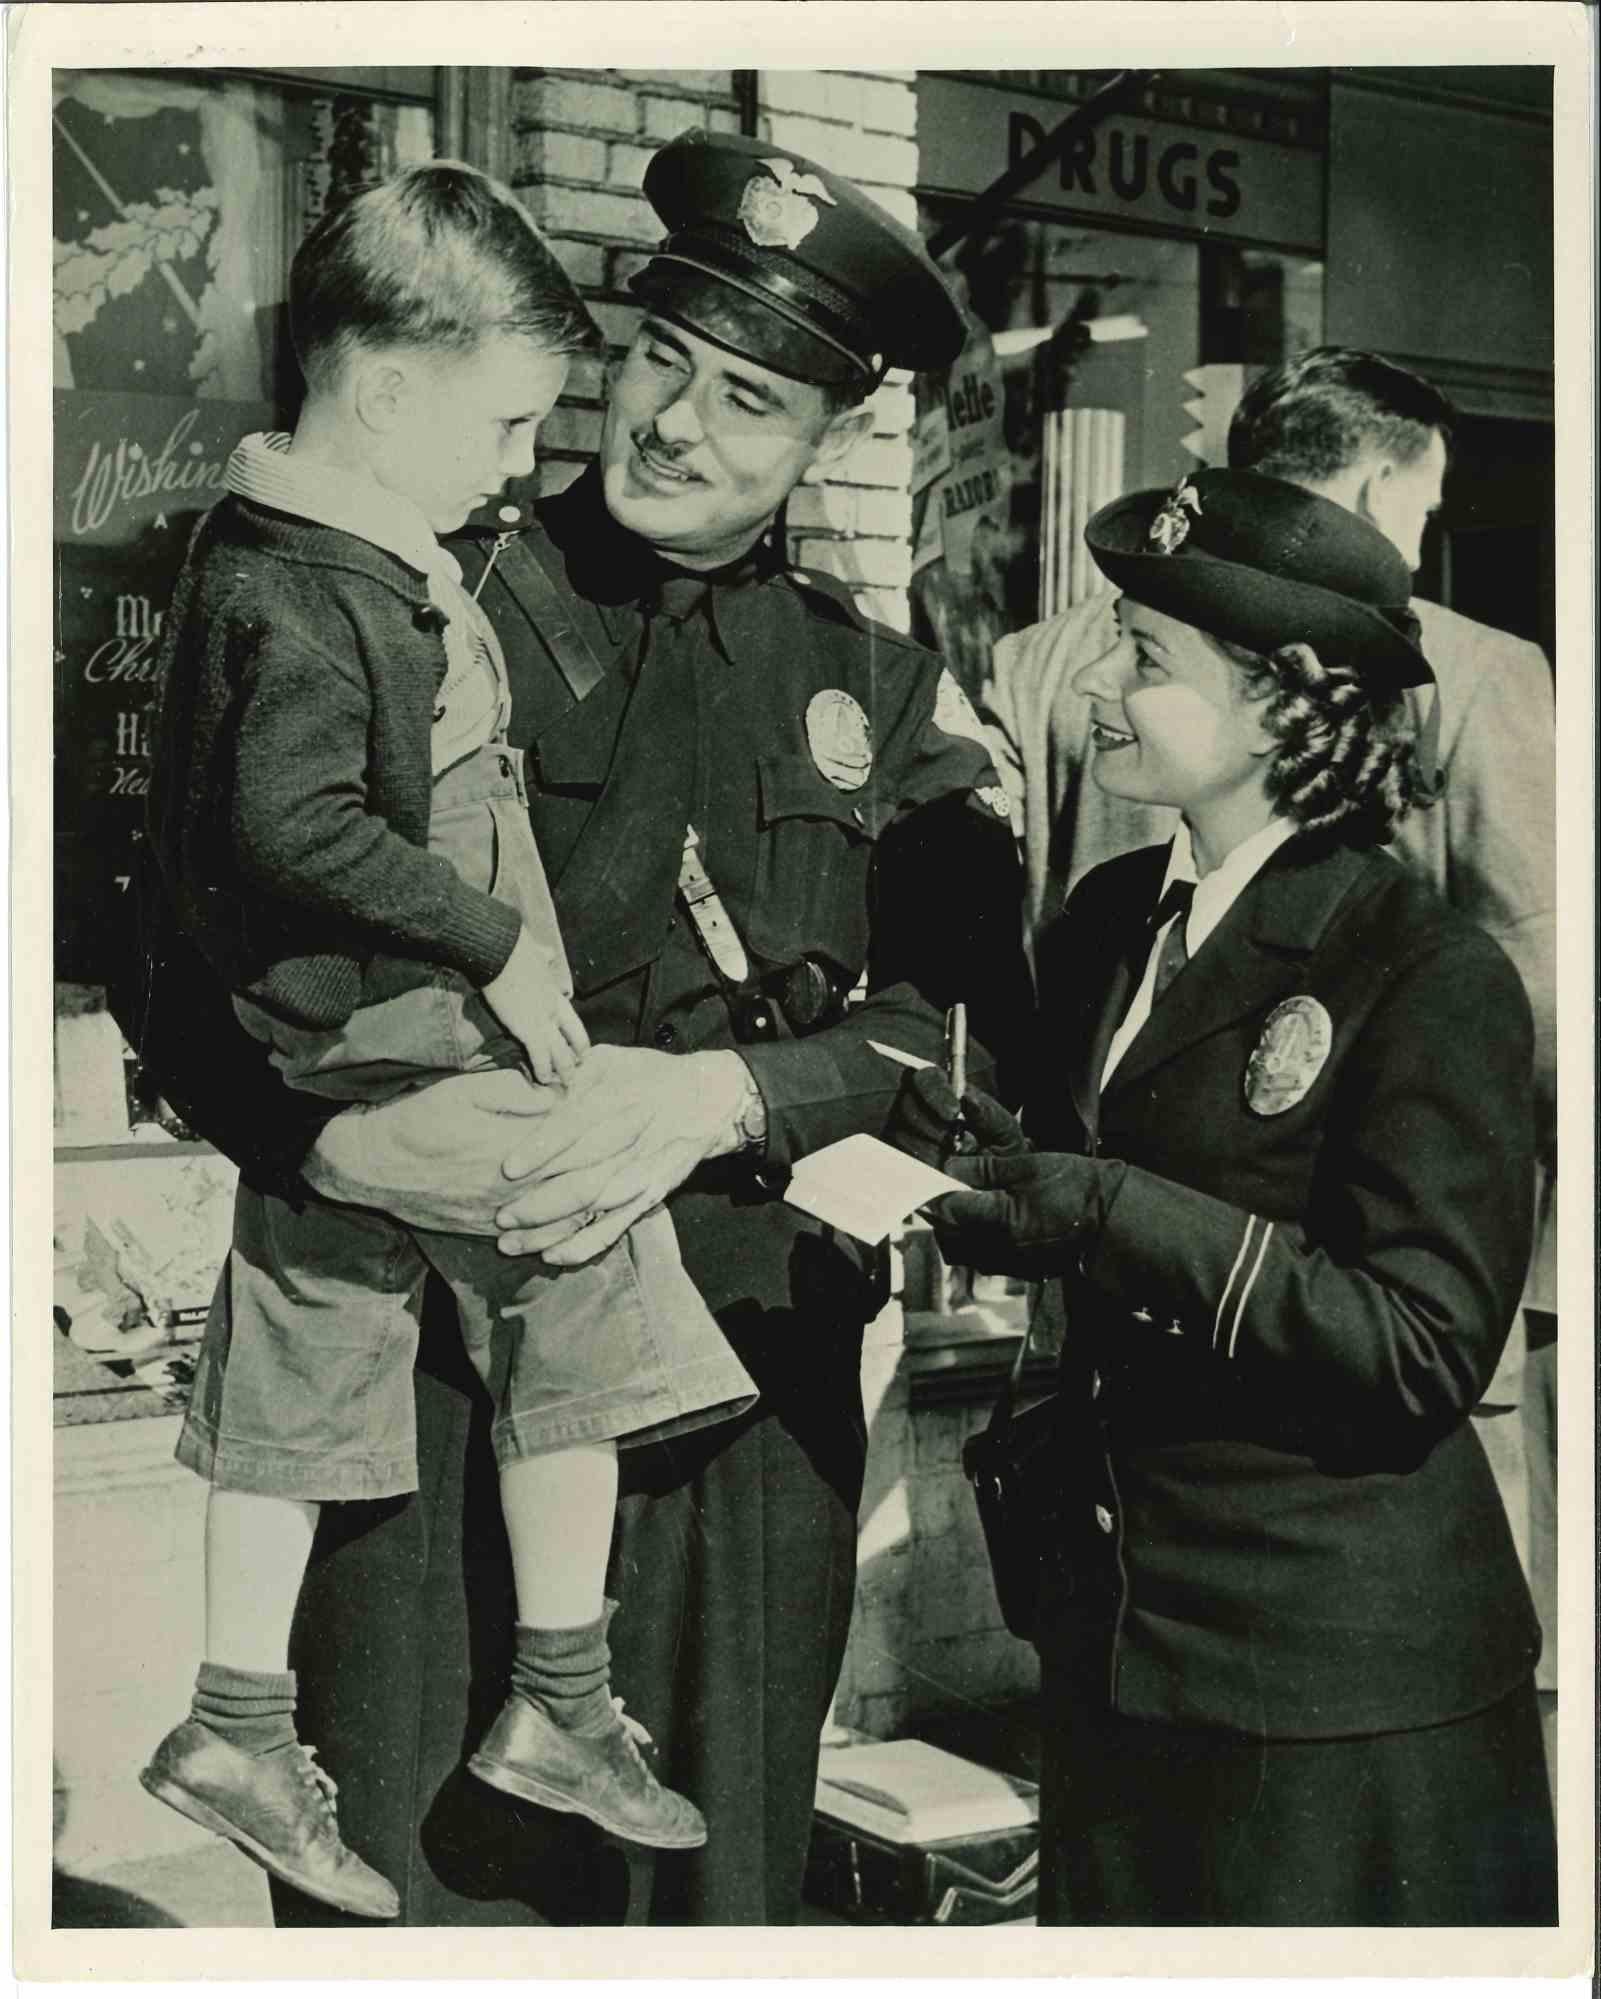 Unknown Figurative Photograph - Policewomen in The U. S.  - Vintage Photograph - Mid 20th Century